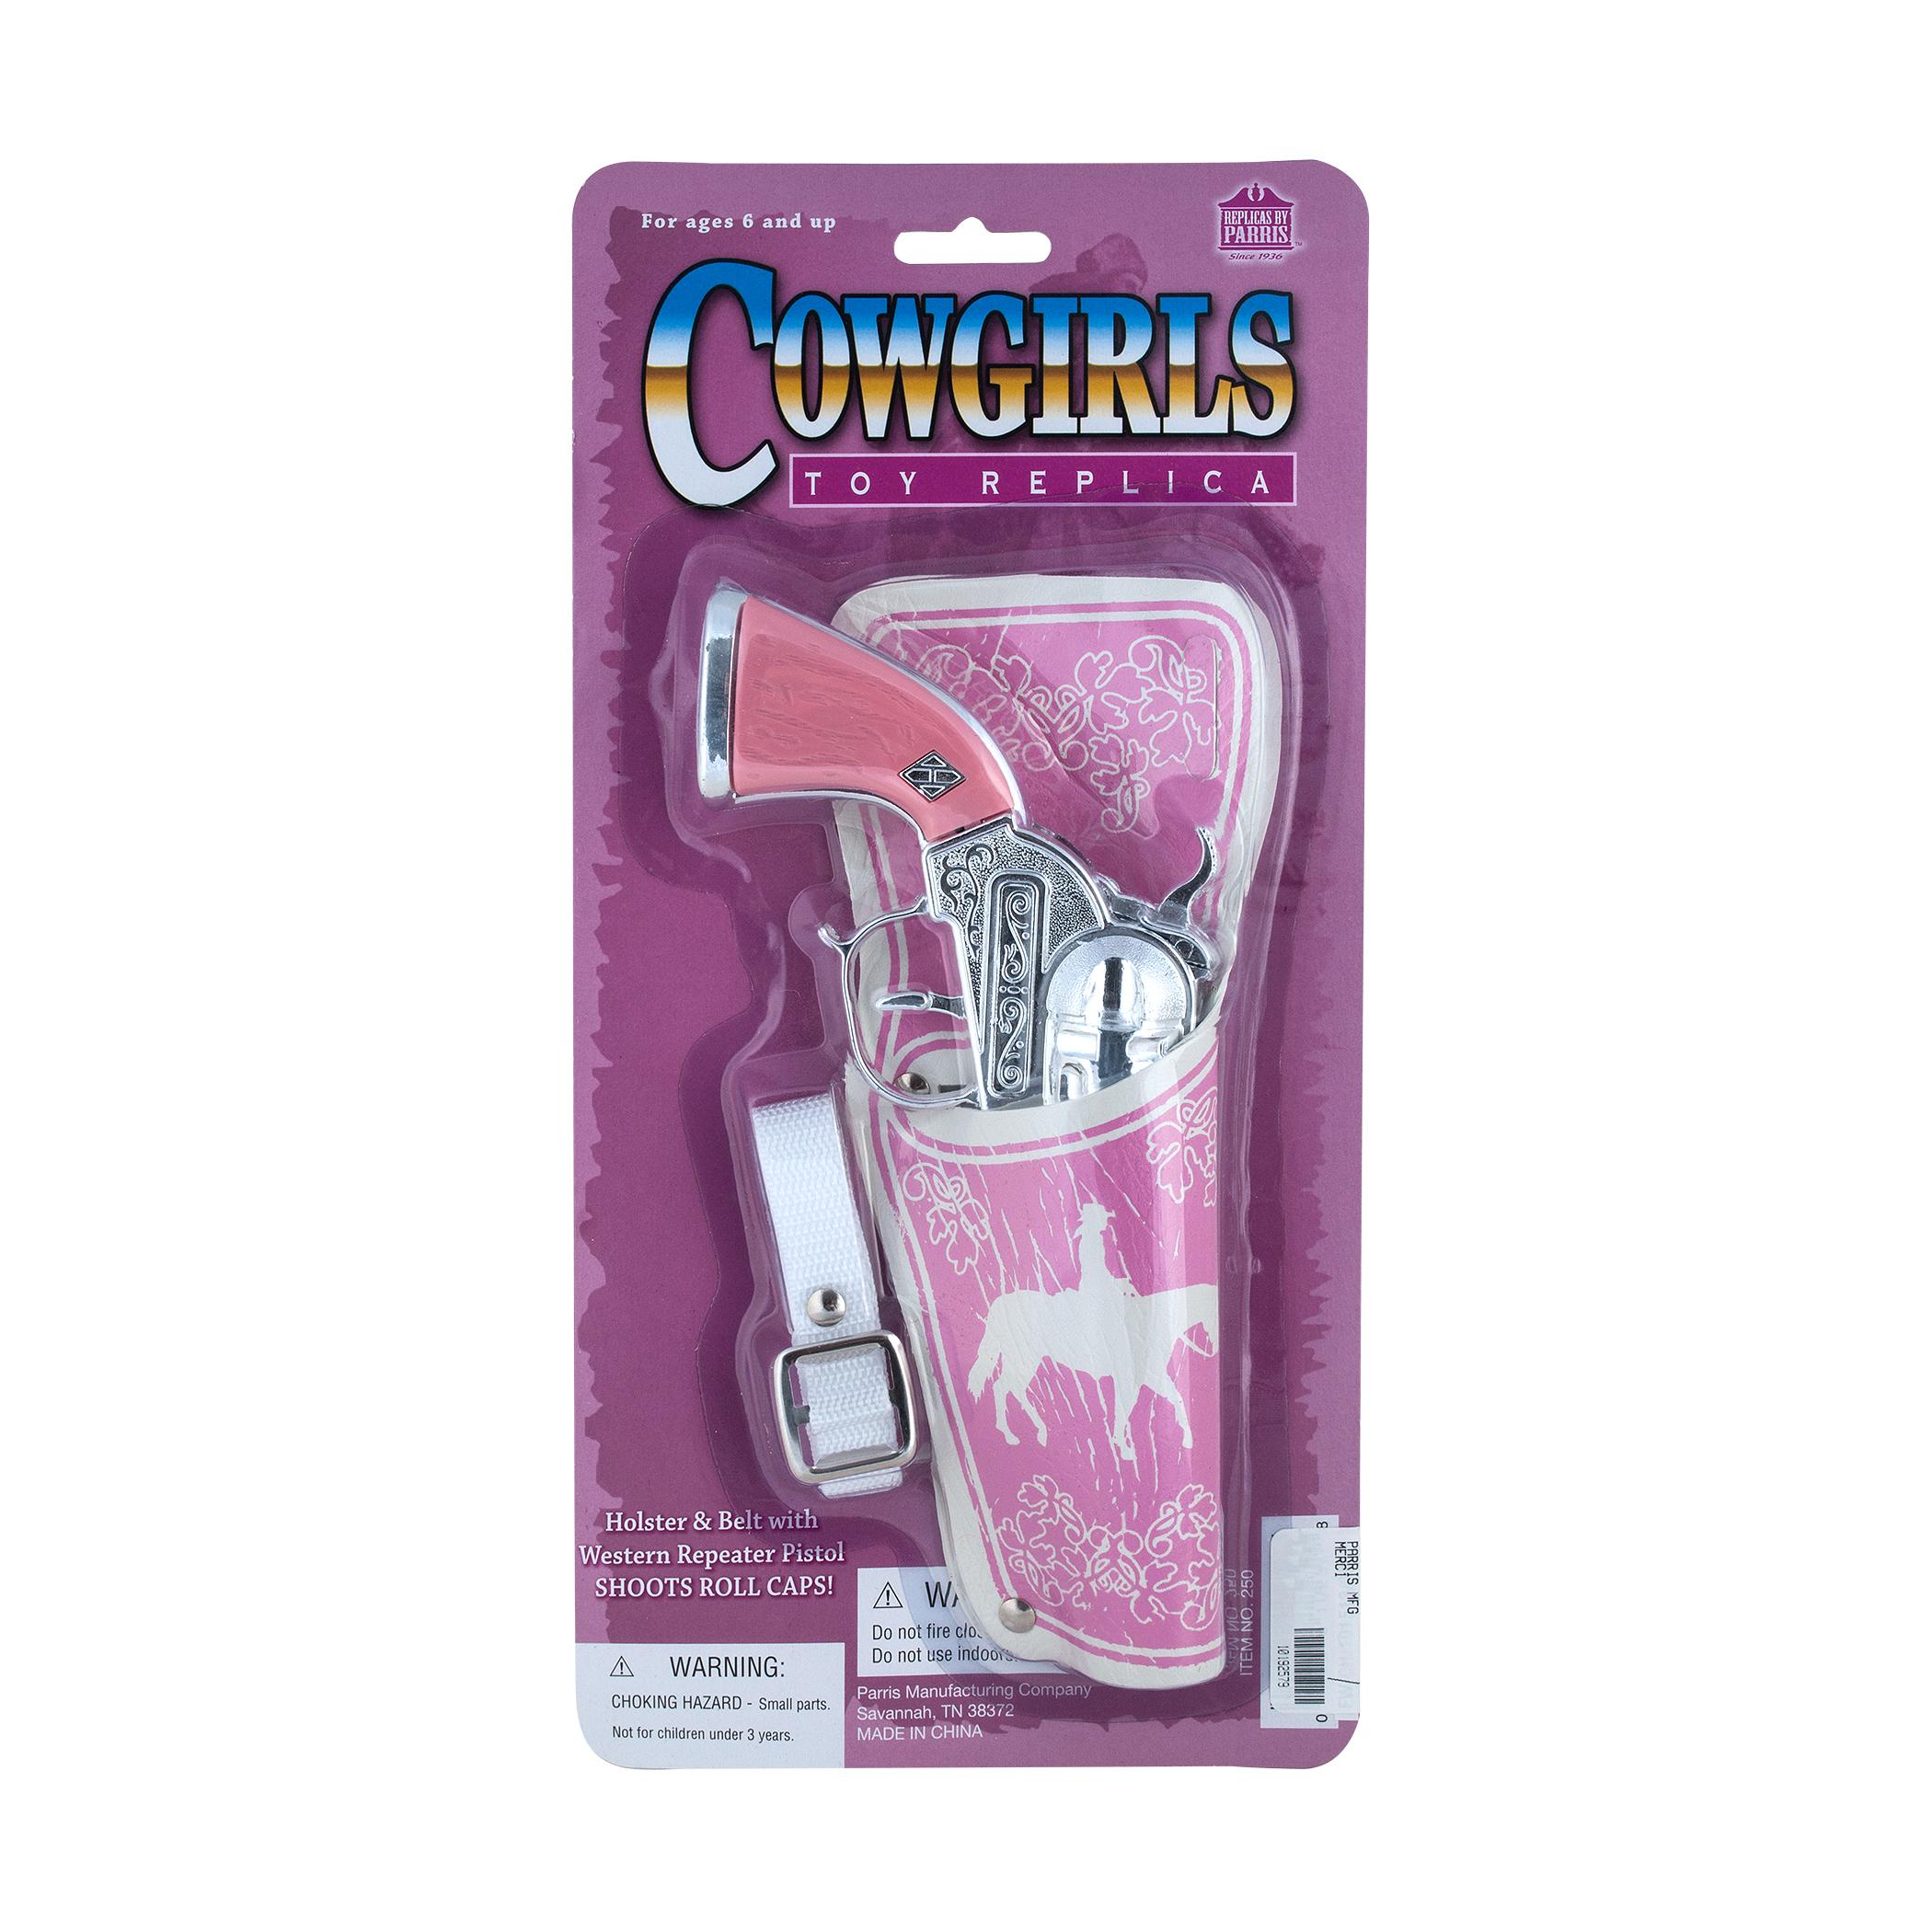  Cowgirl Toy Pistol Set